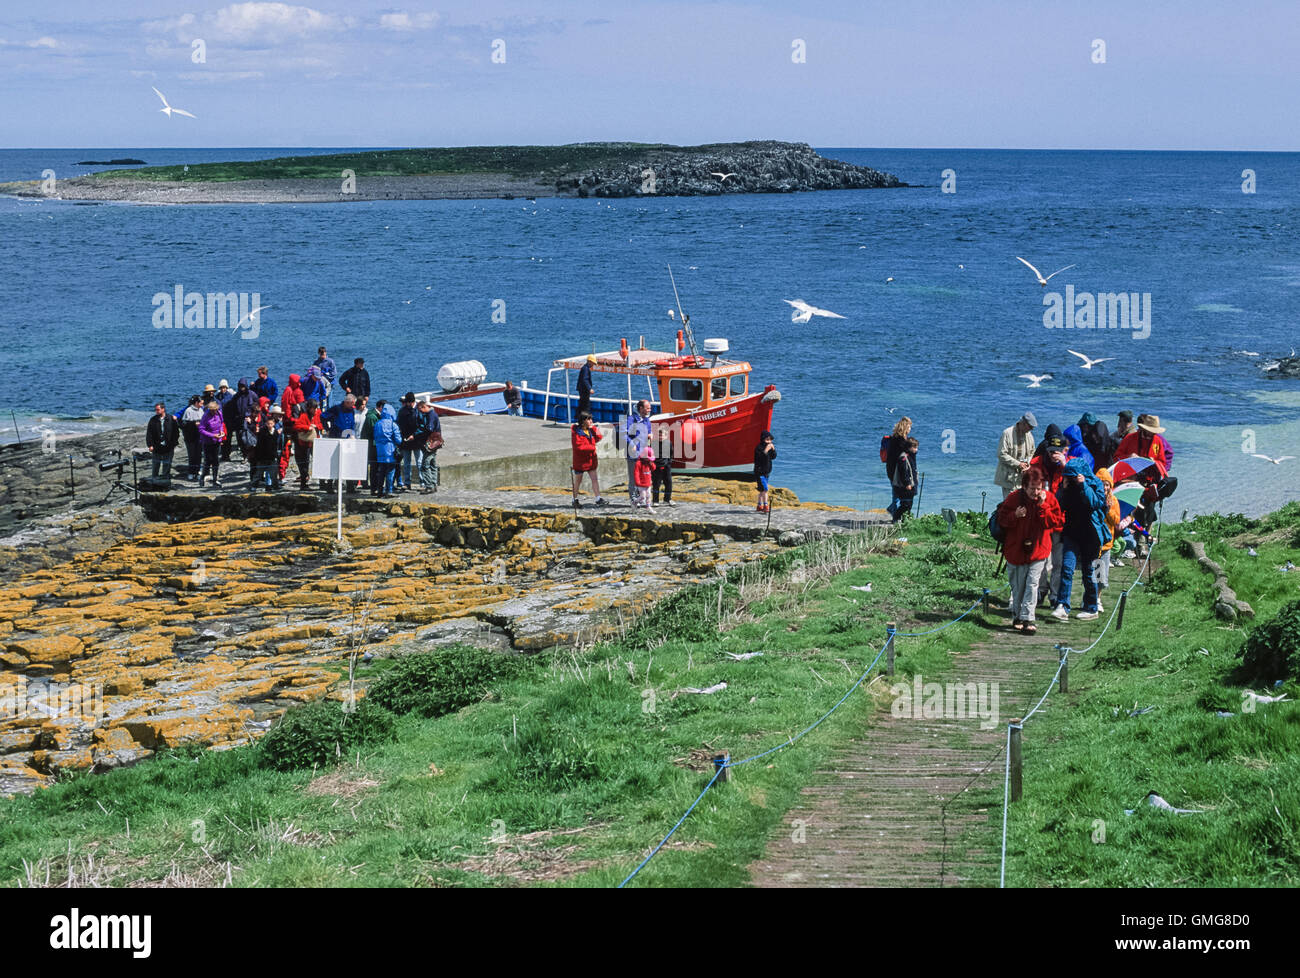 Visitors arrive on the Inner Farne, off the coast of Northumberland, UK. Arctic Terns, nesting near by, dive bomb the visitors. Stock Photo